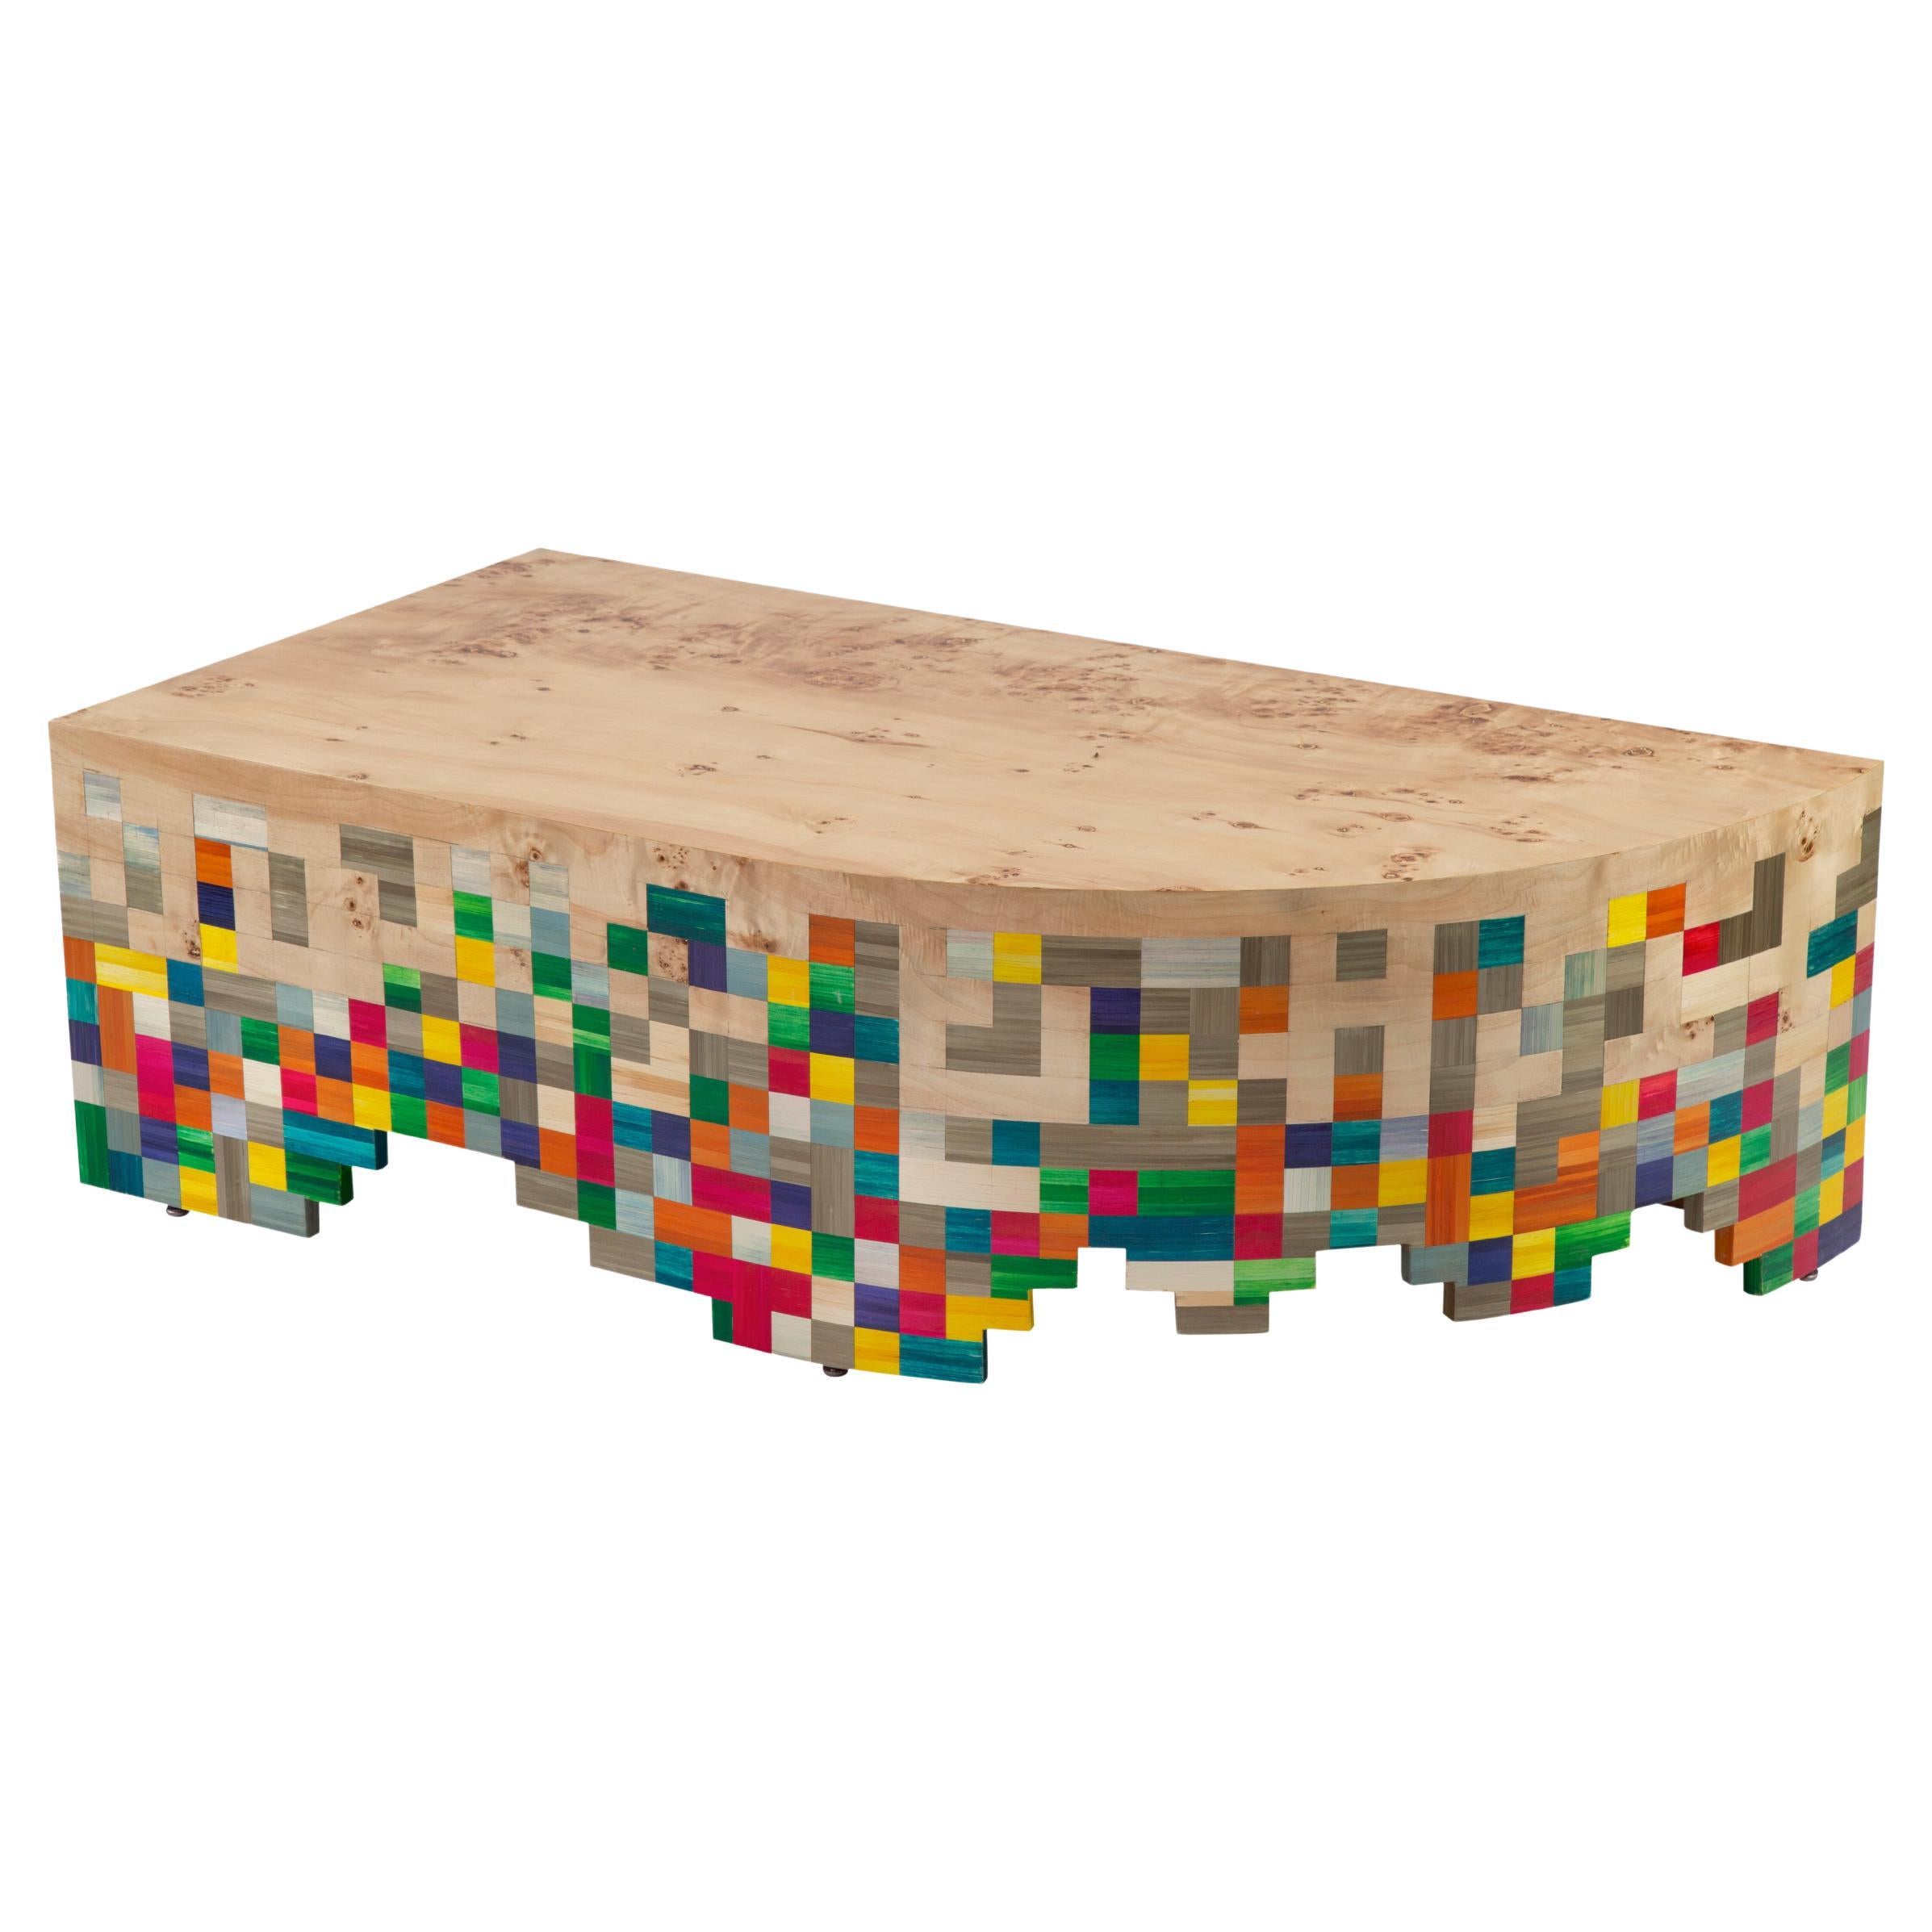 Asymmetric Colorful Hand-Laid Straw Coffee Table with Rare Apple Rind Veneer For Sale